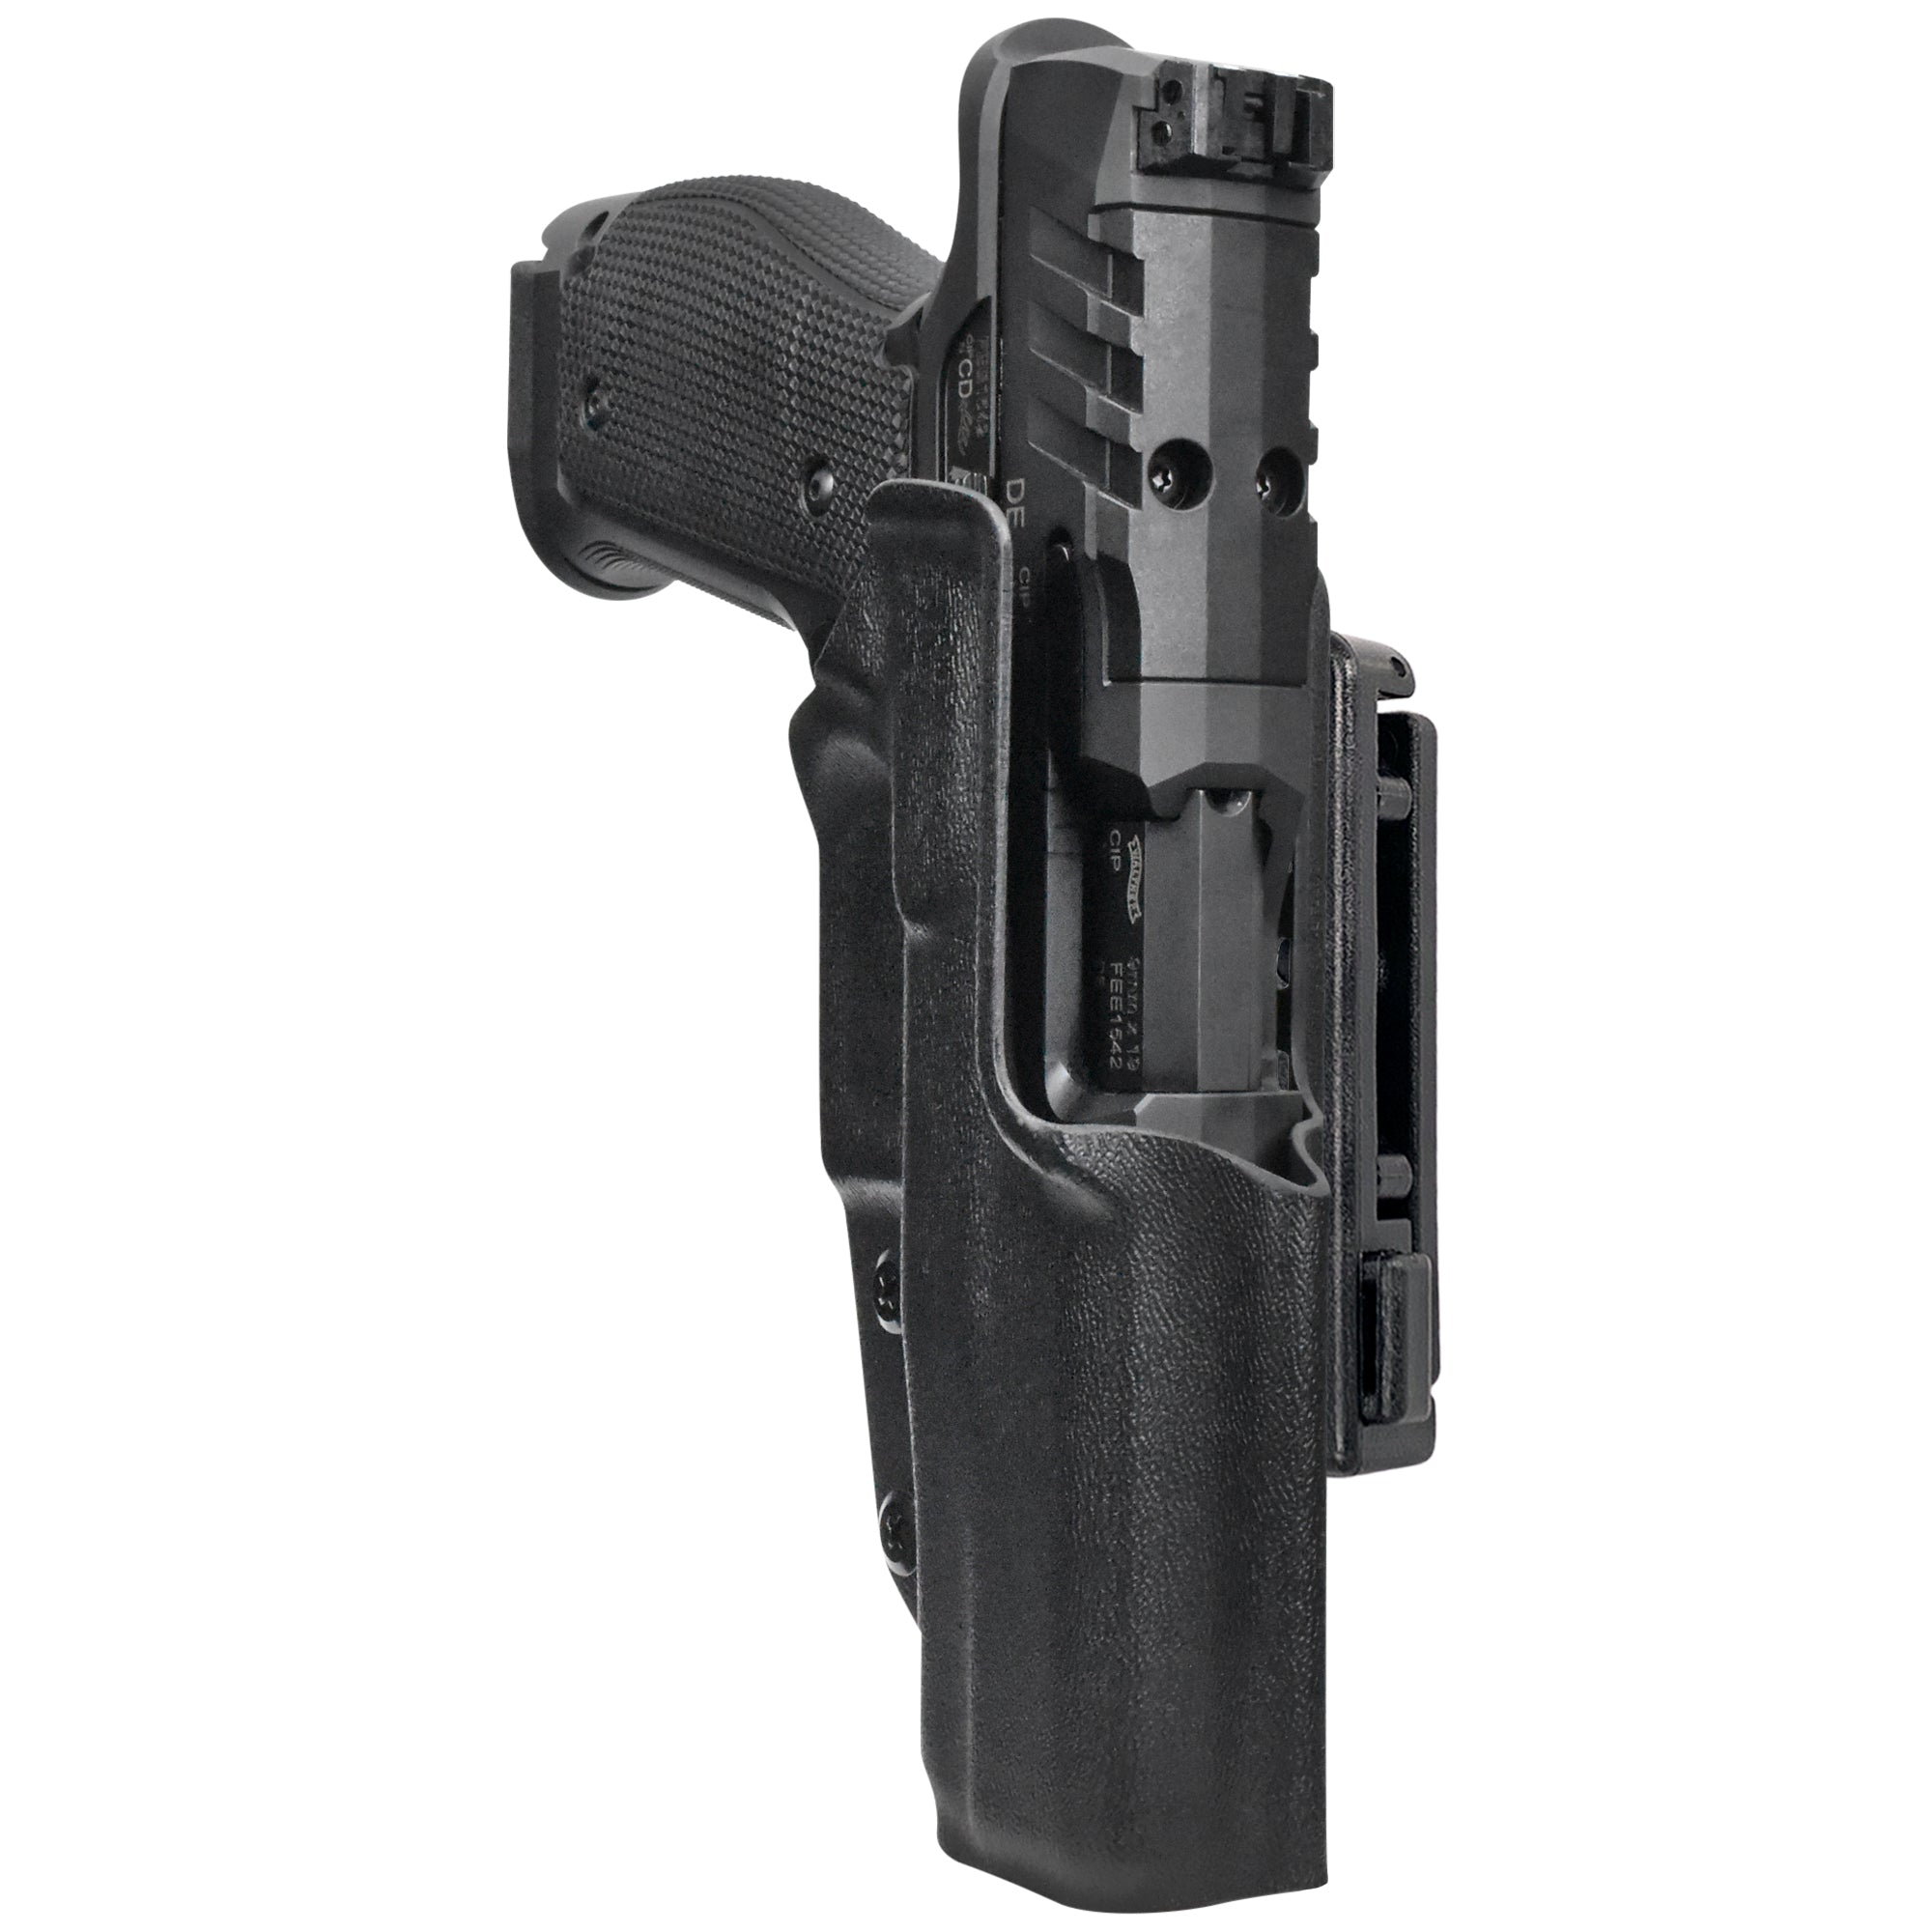 Pro IDPA Competition Holster in Black